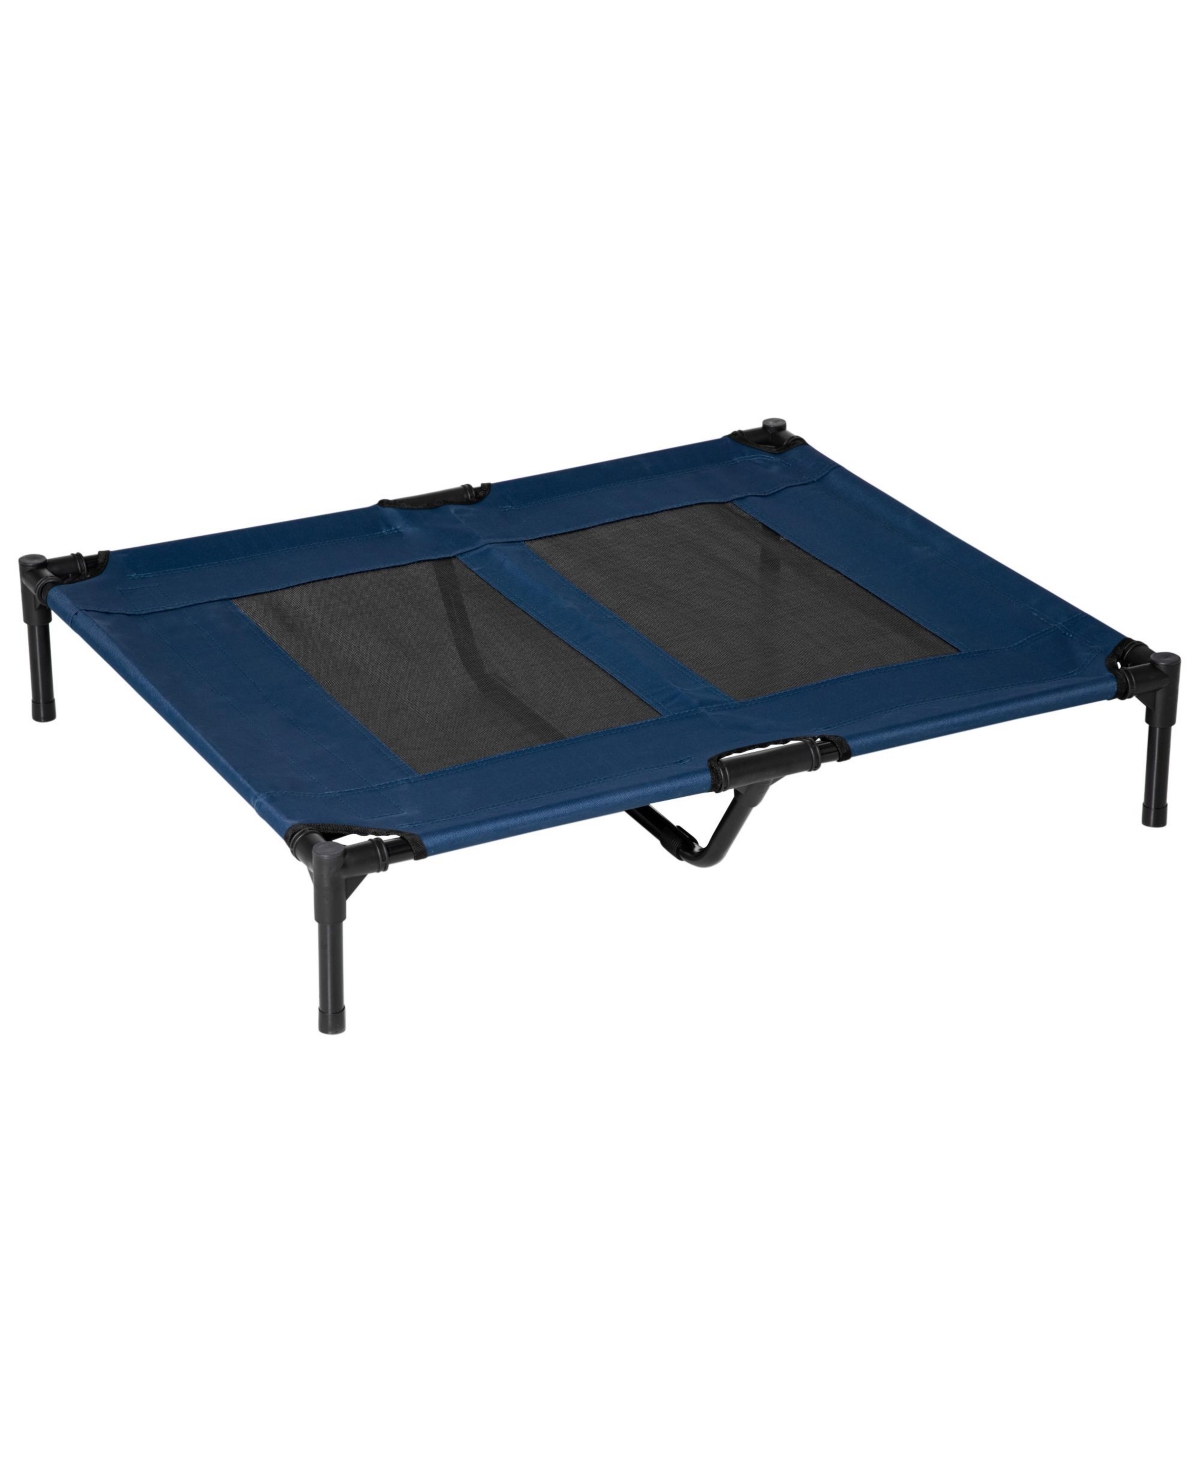 Portable Large Dog Cat Elevated Bed Camping Pet Indoor Outdoor Blue - Blue